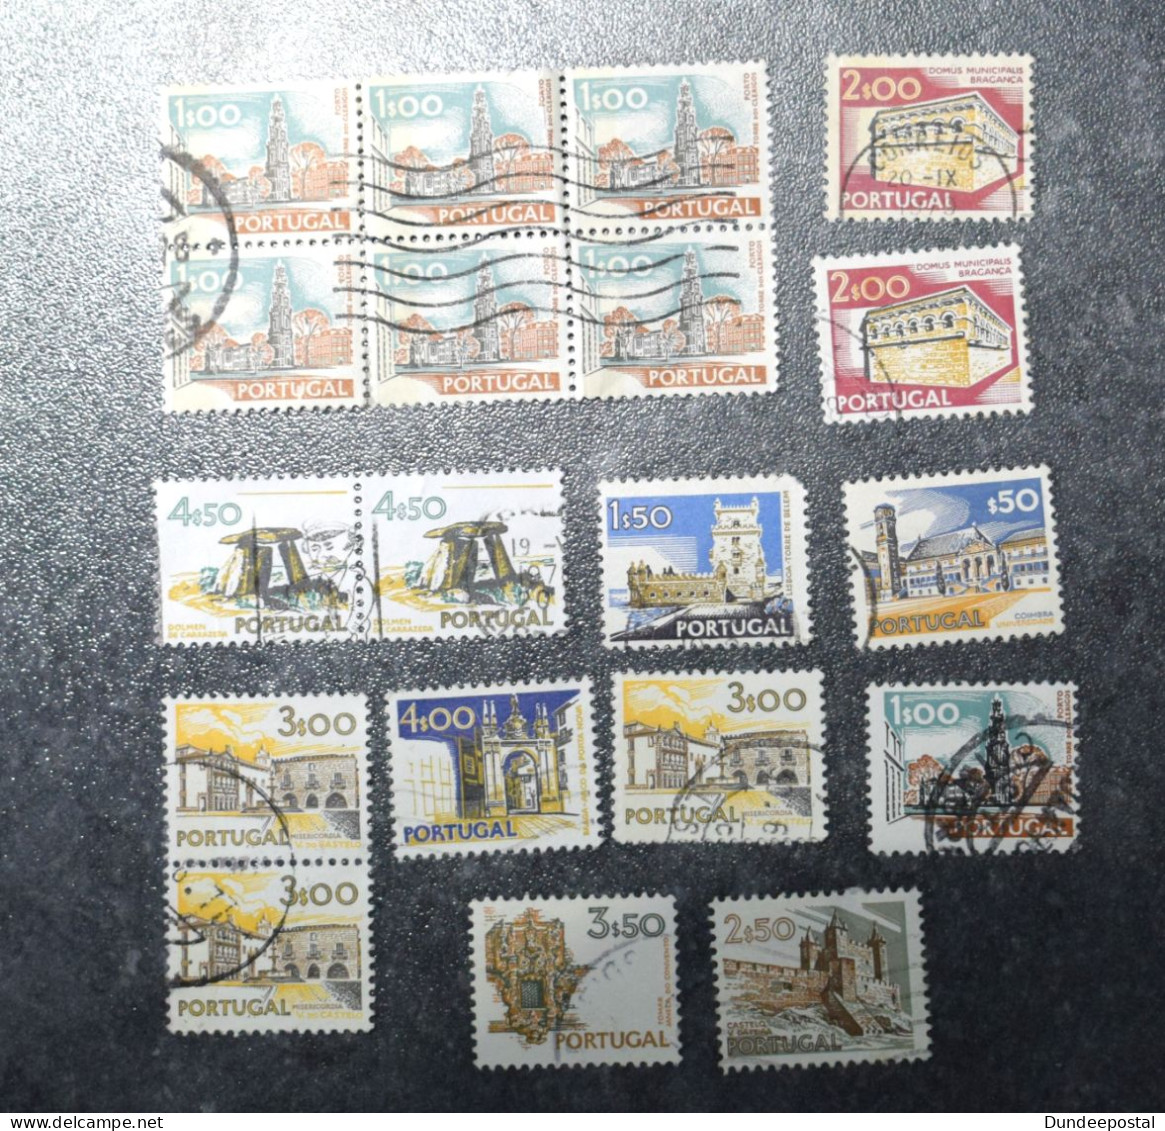 PORTUGAL STAMPS  Portugal Cities And Landscapes  1953 ~~L@@K~~ - Usado